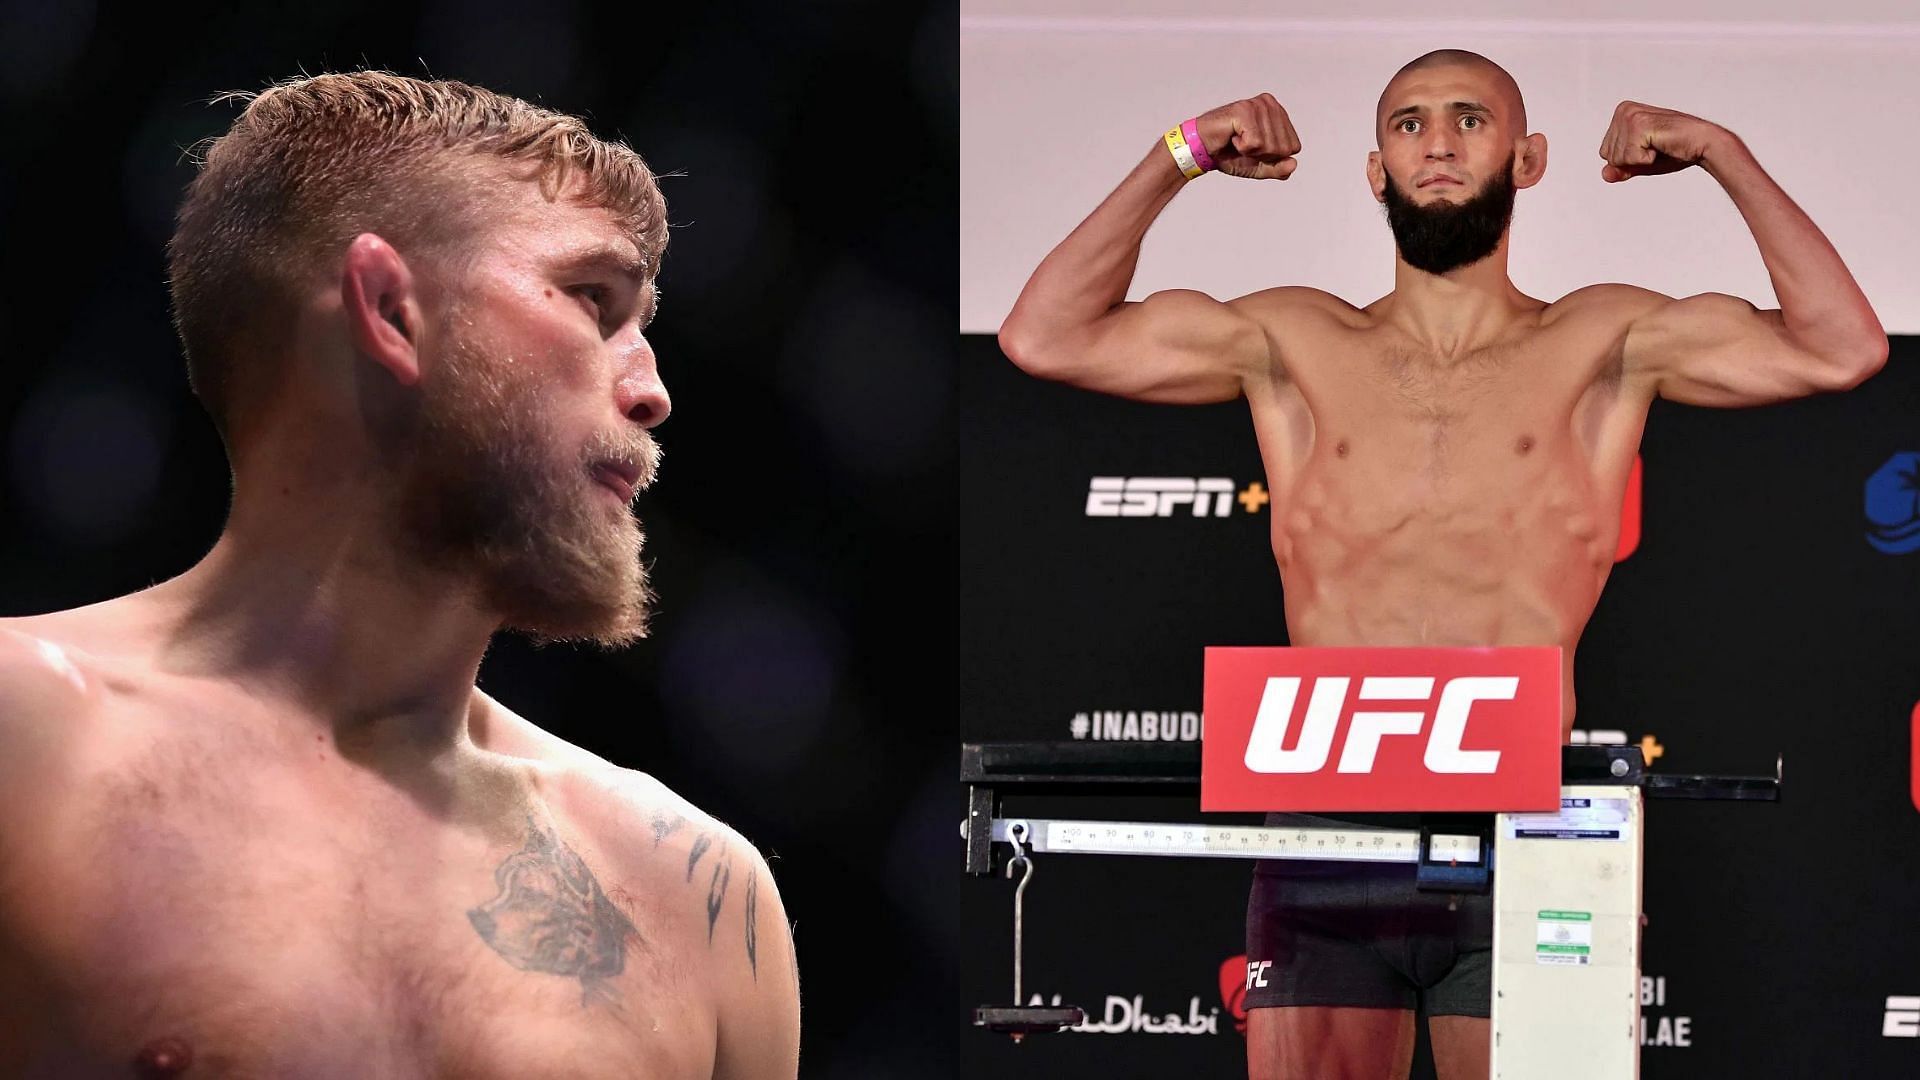 Alexander Gustafsson (left) and Khamzat Chimaev (right) [Images courtesy of Getty]